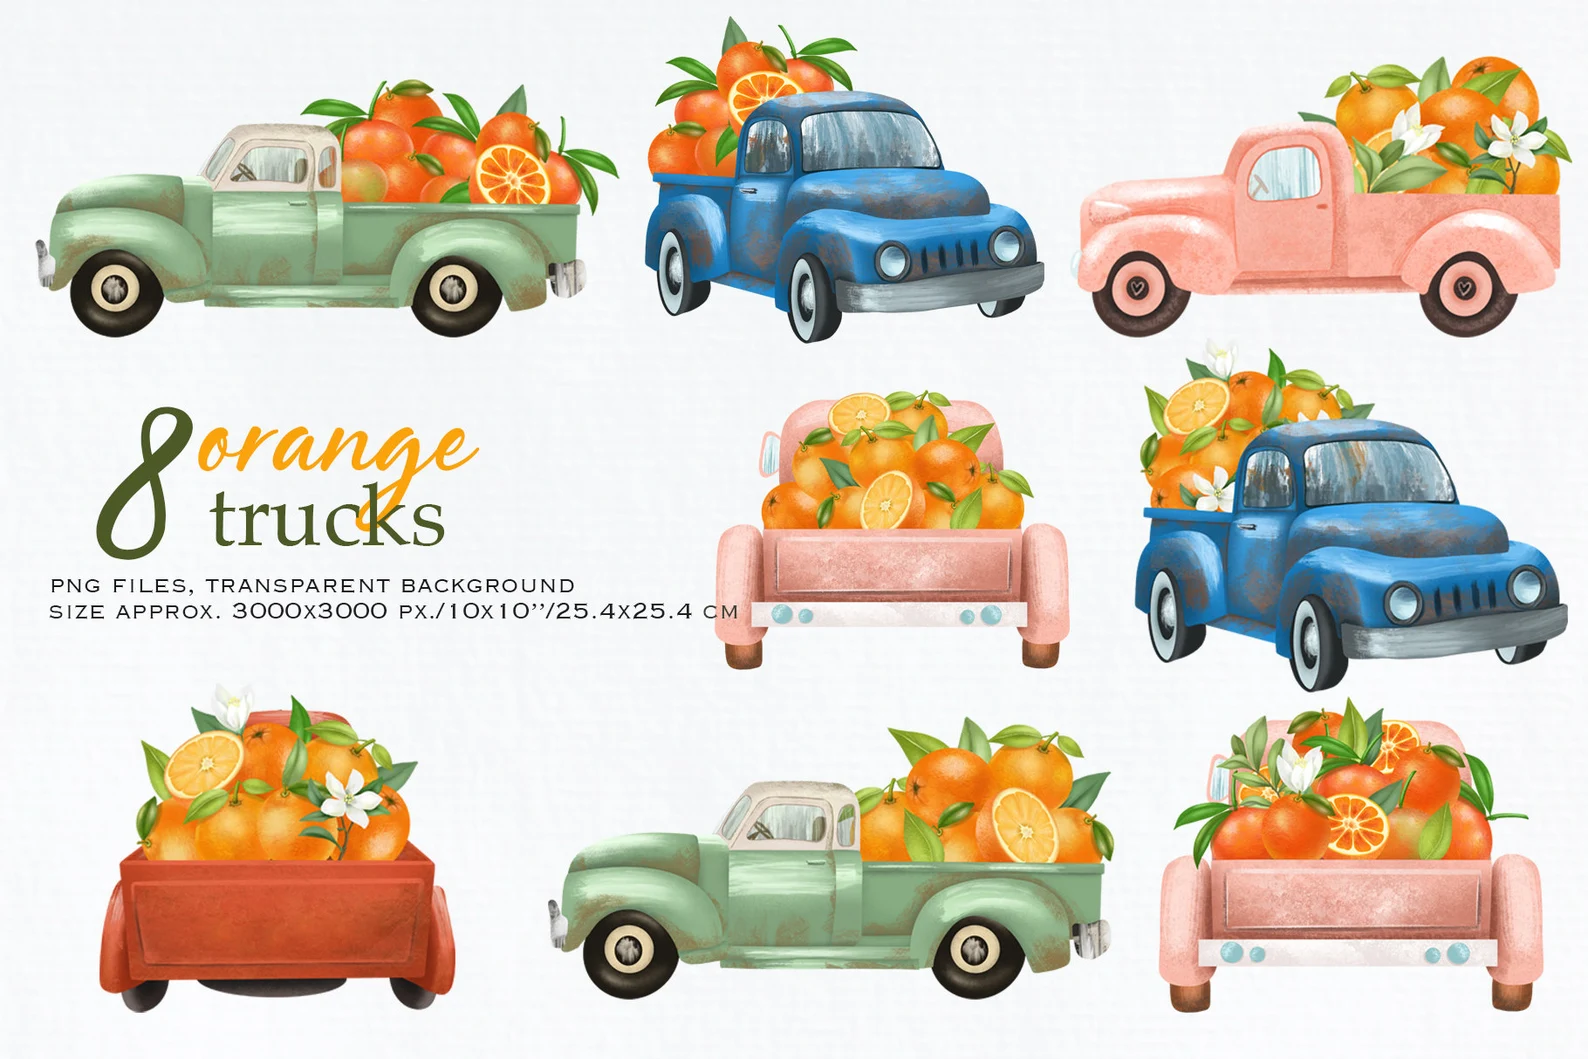 Cool art cars with oranges.